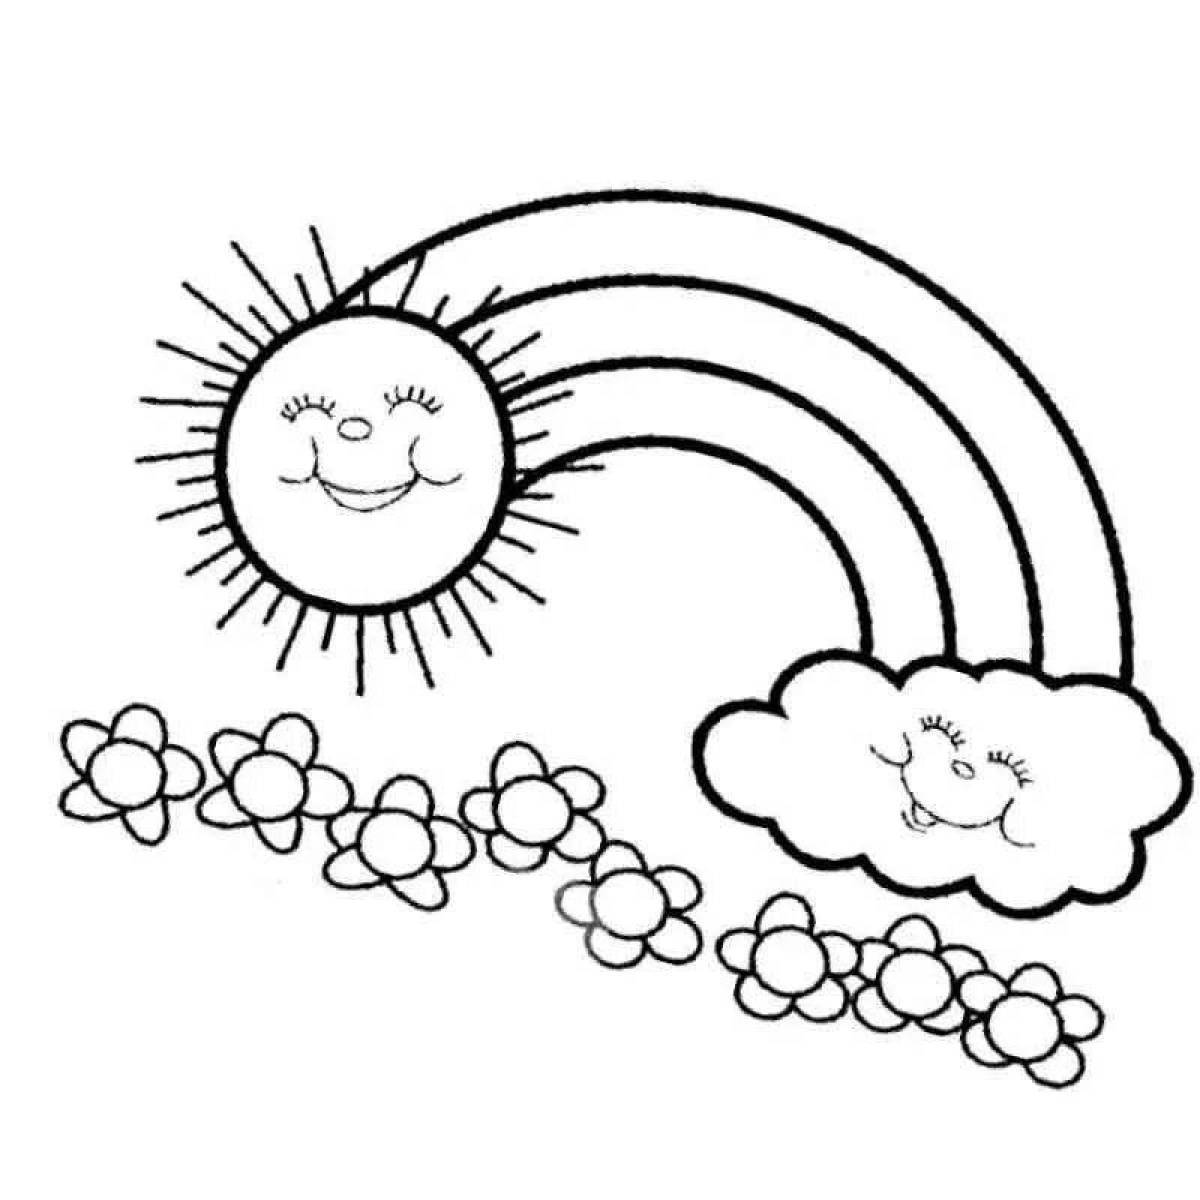 Fun coloring book sun for 3-4 year olds